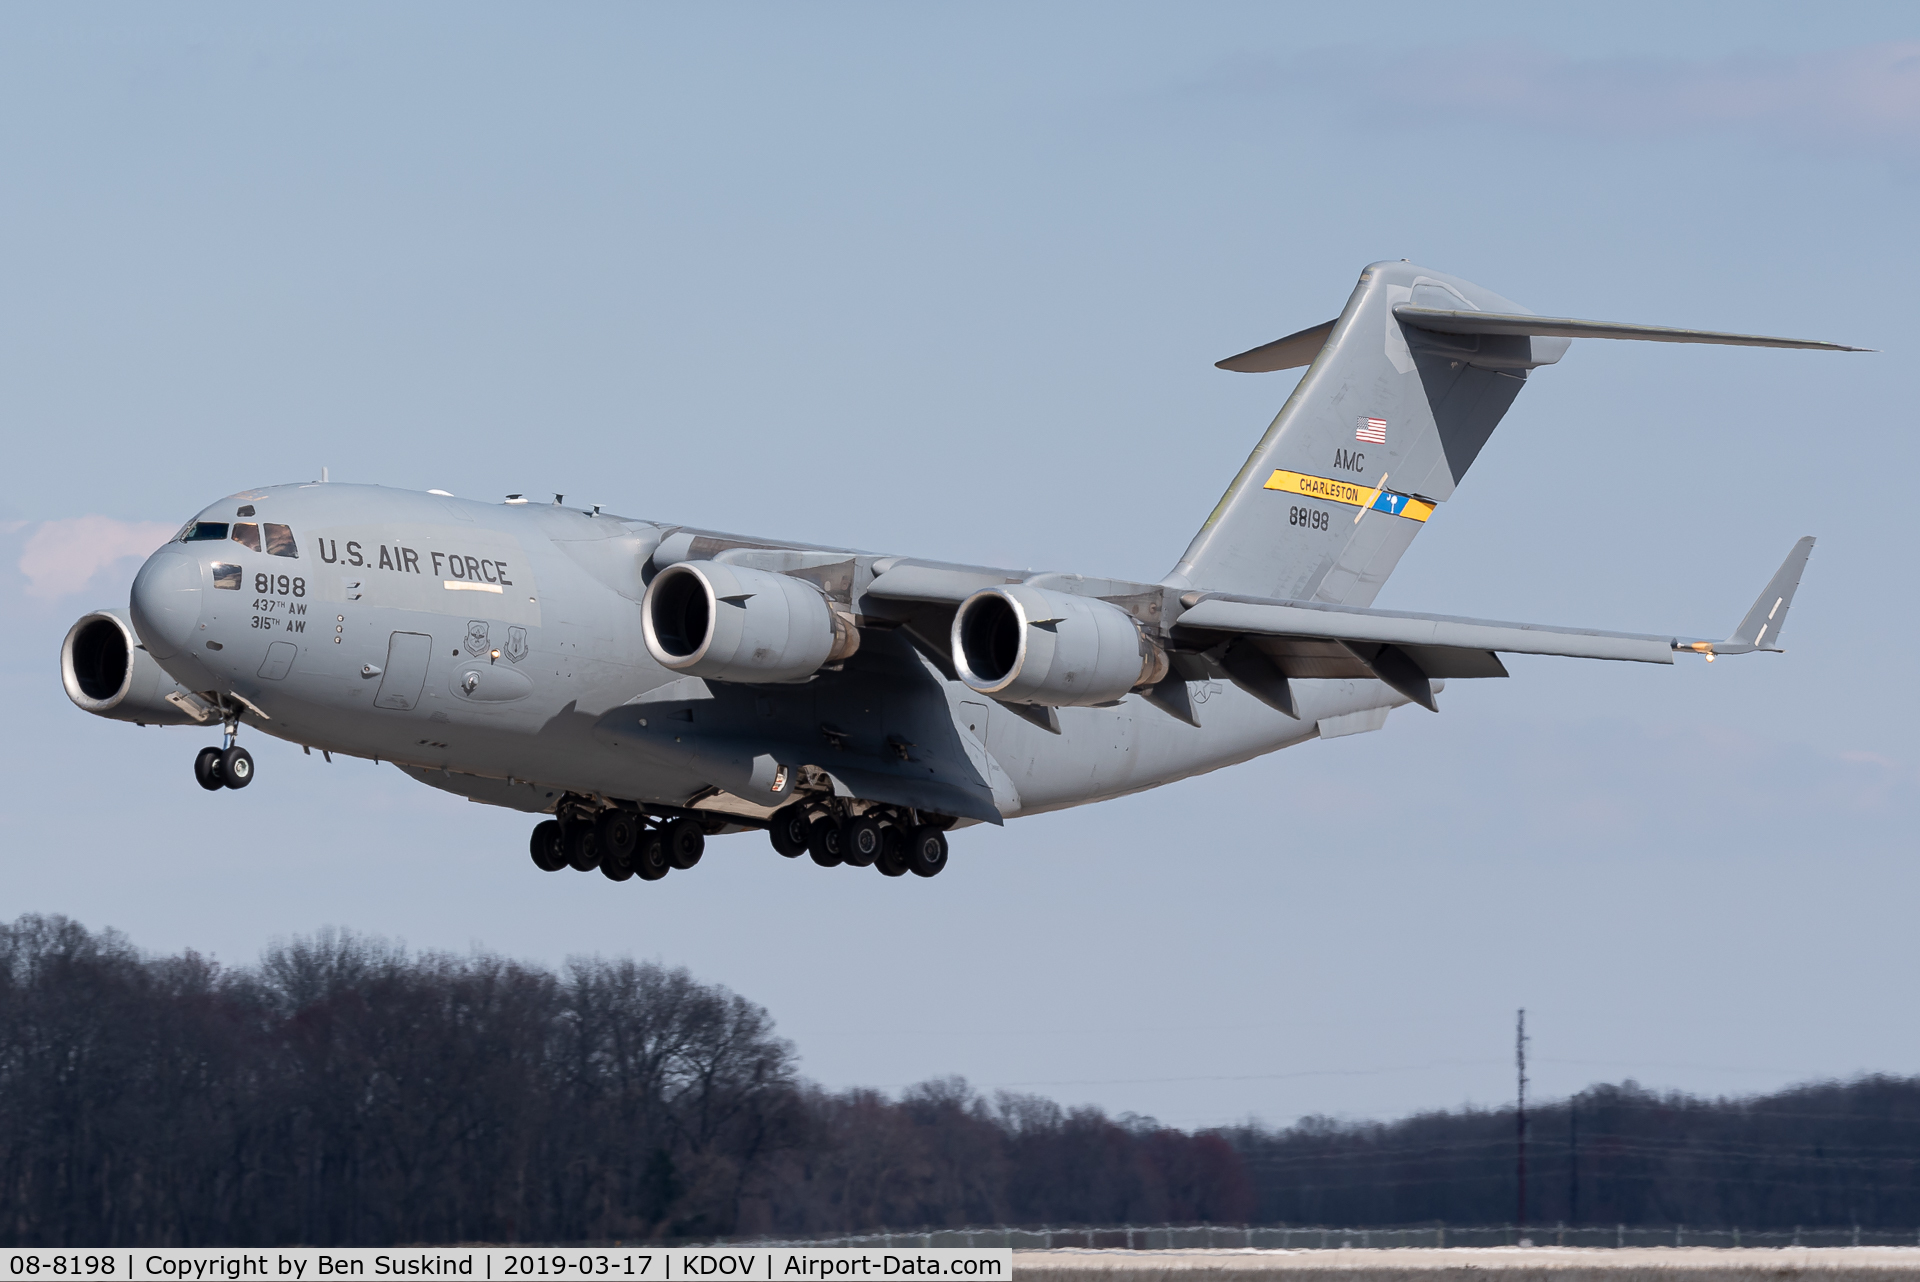 08-8198, 2008 Boeing C-17A Globemaster III C/N P-198, RCH landing at Dover AFB.